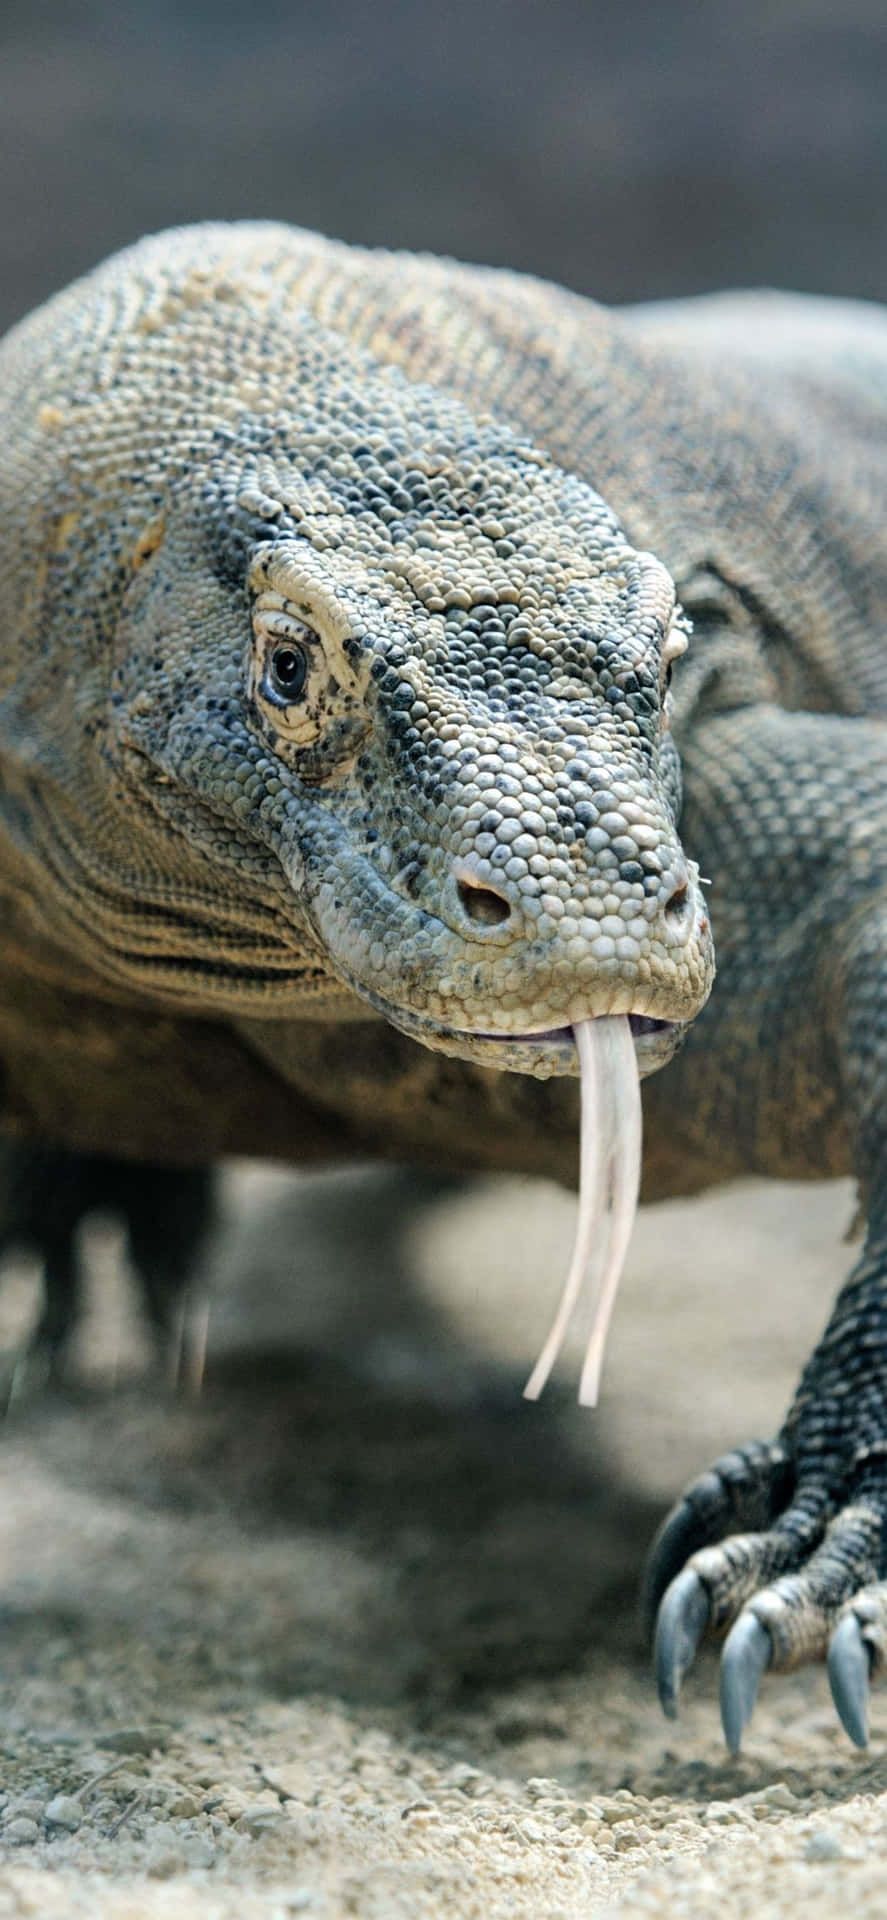 A Large Lizard With Its Mouth Open